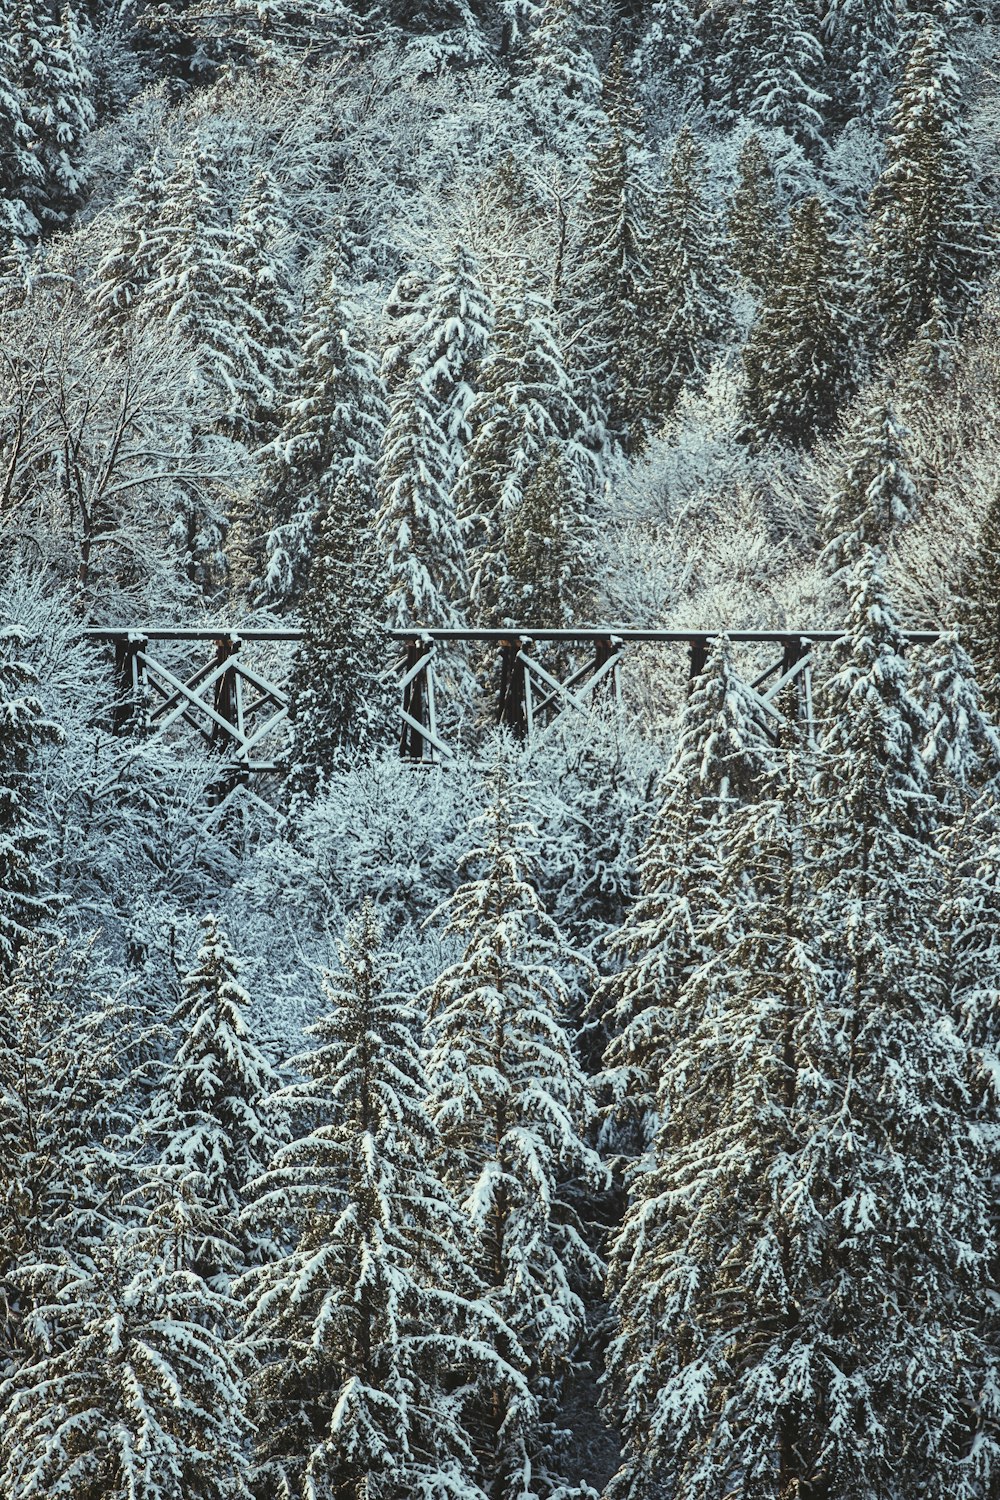 a bridge in the middle of a forest covered in snow